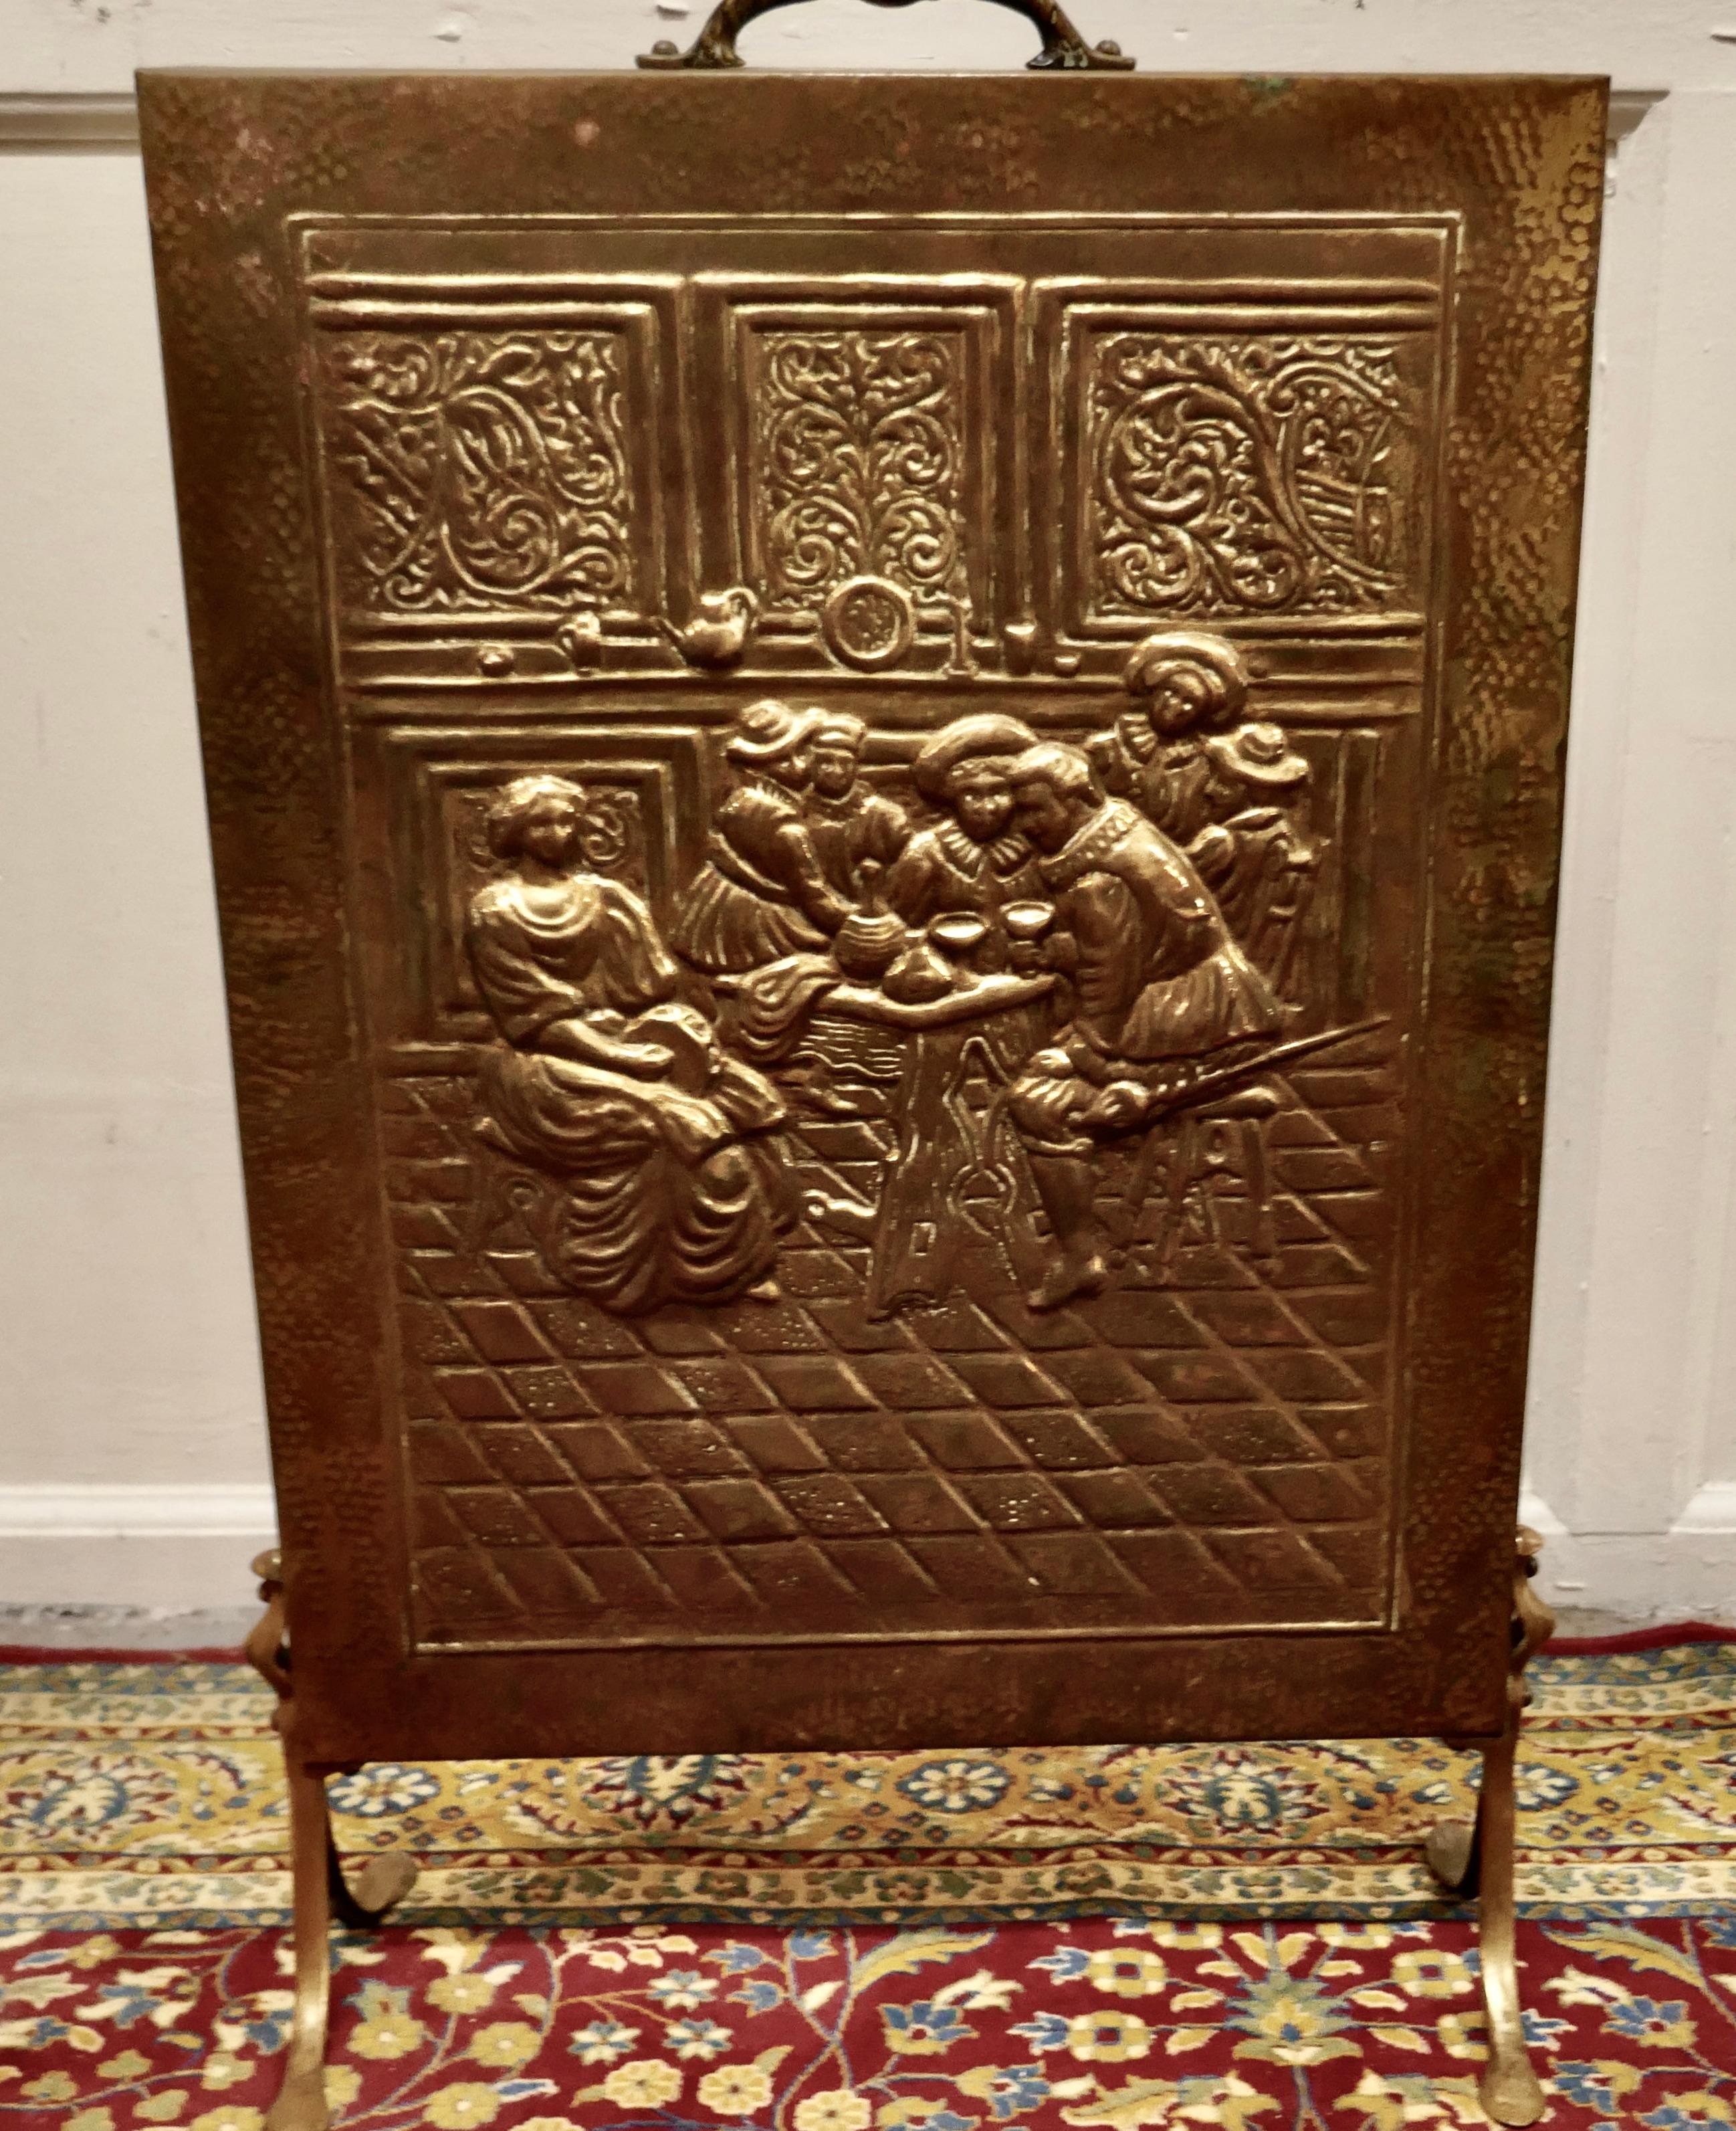 Early 20th century tavern scene brass fire screen

This is an attractive fire screen it pictures a 19th century tavern.
The screen is good quality and made in brass with a handle to the top.
The screen is in good condition.
The screen is 18”